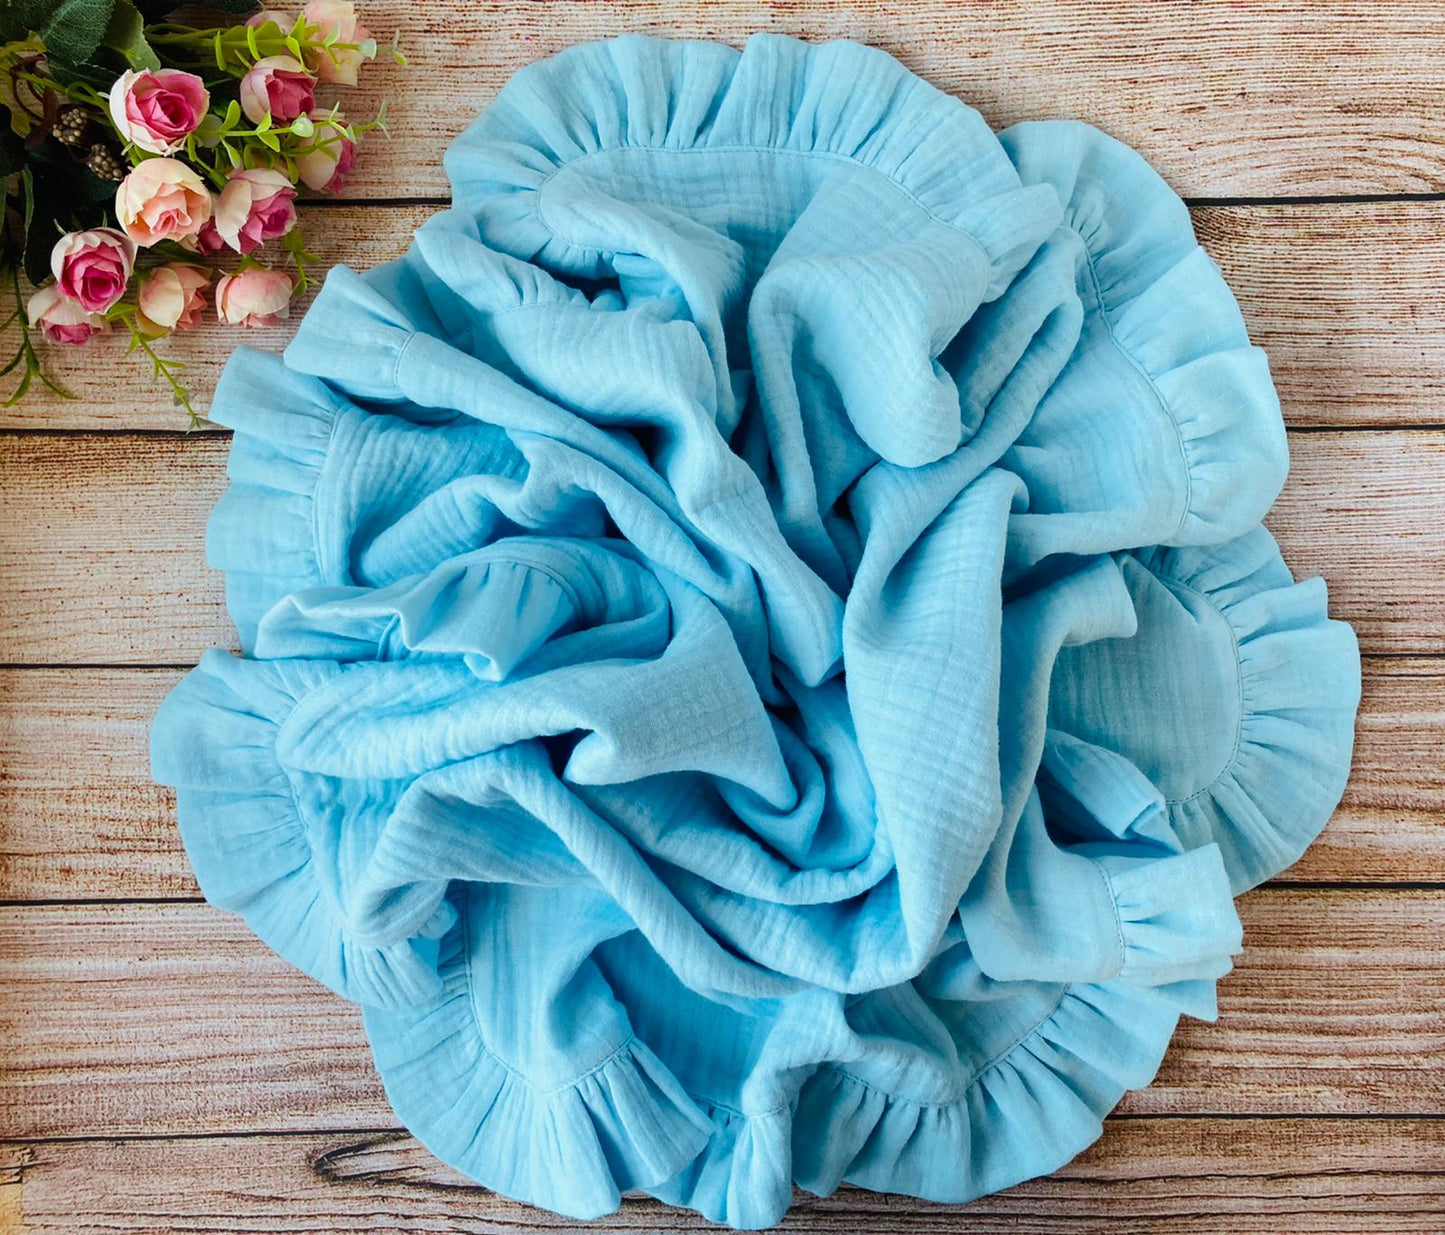 2 layer Muslin baby blanket with ruffles - Light blue